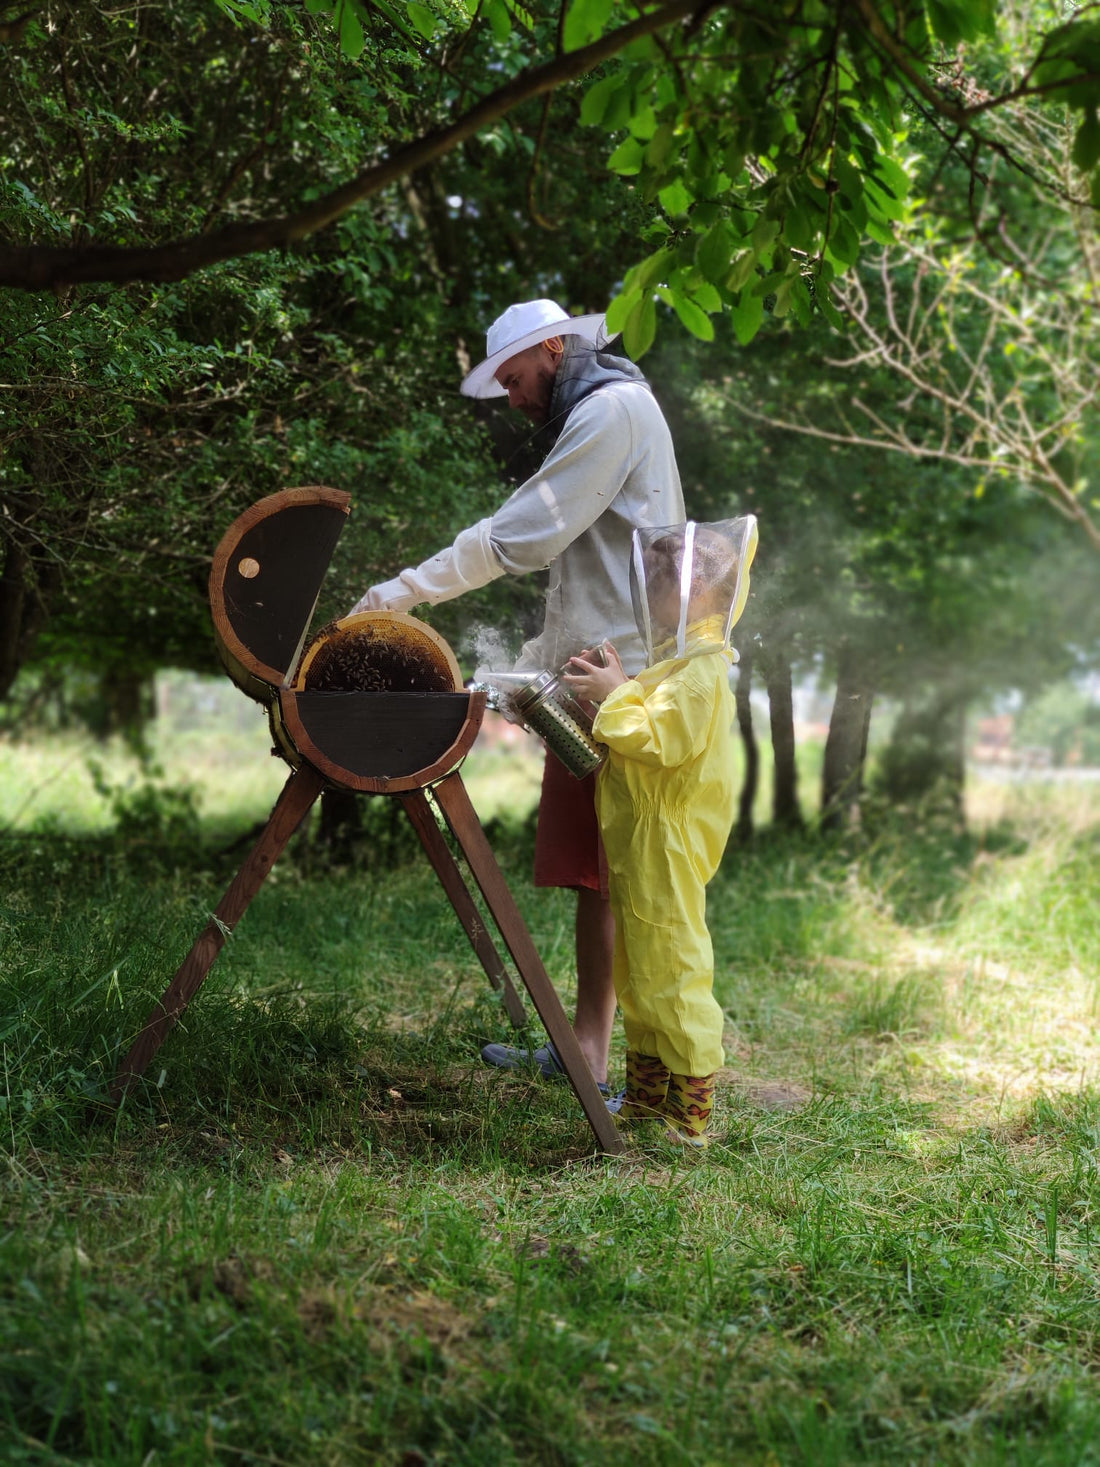 The Impact of Beekeeping on Pollination and the Environment